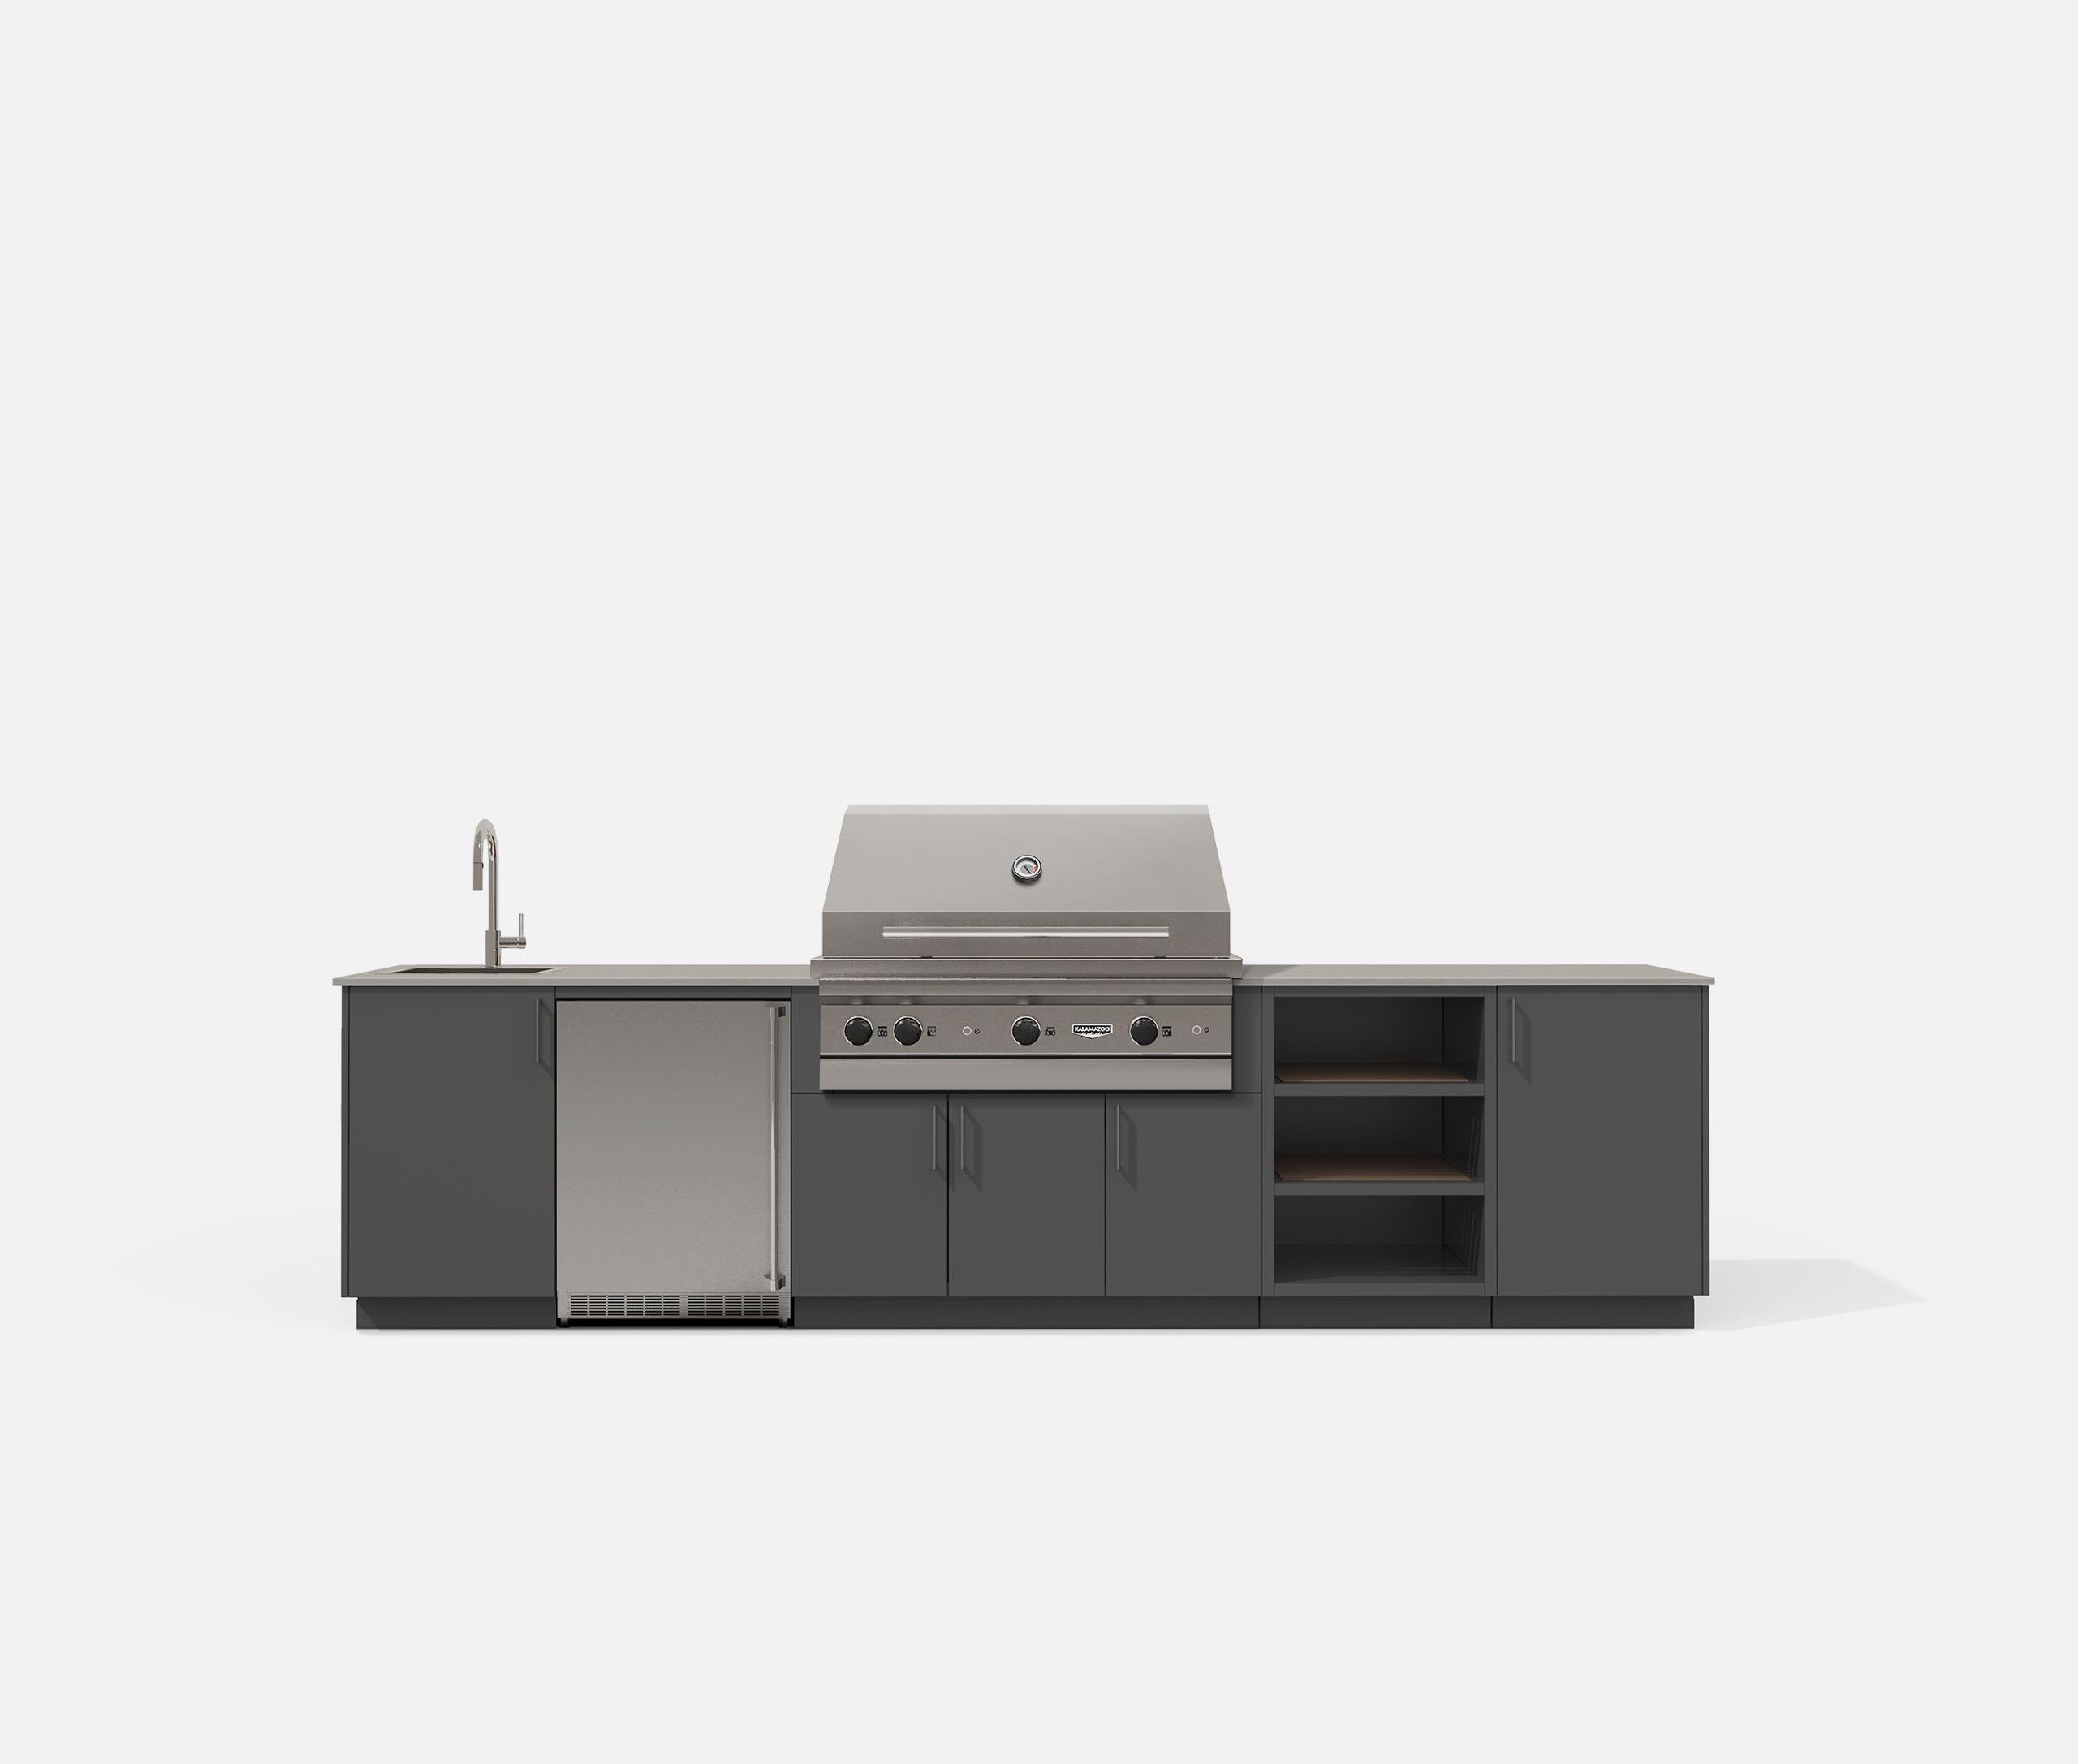 Urban Bonfire CTAHOE42ANTHRACITE Tahoe 42 Outdoor Kitchen (Anthracite)GRILL SOLD SEPARATELY